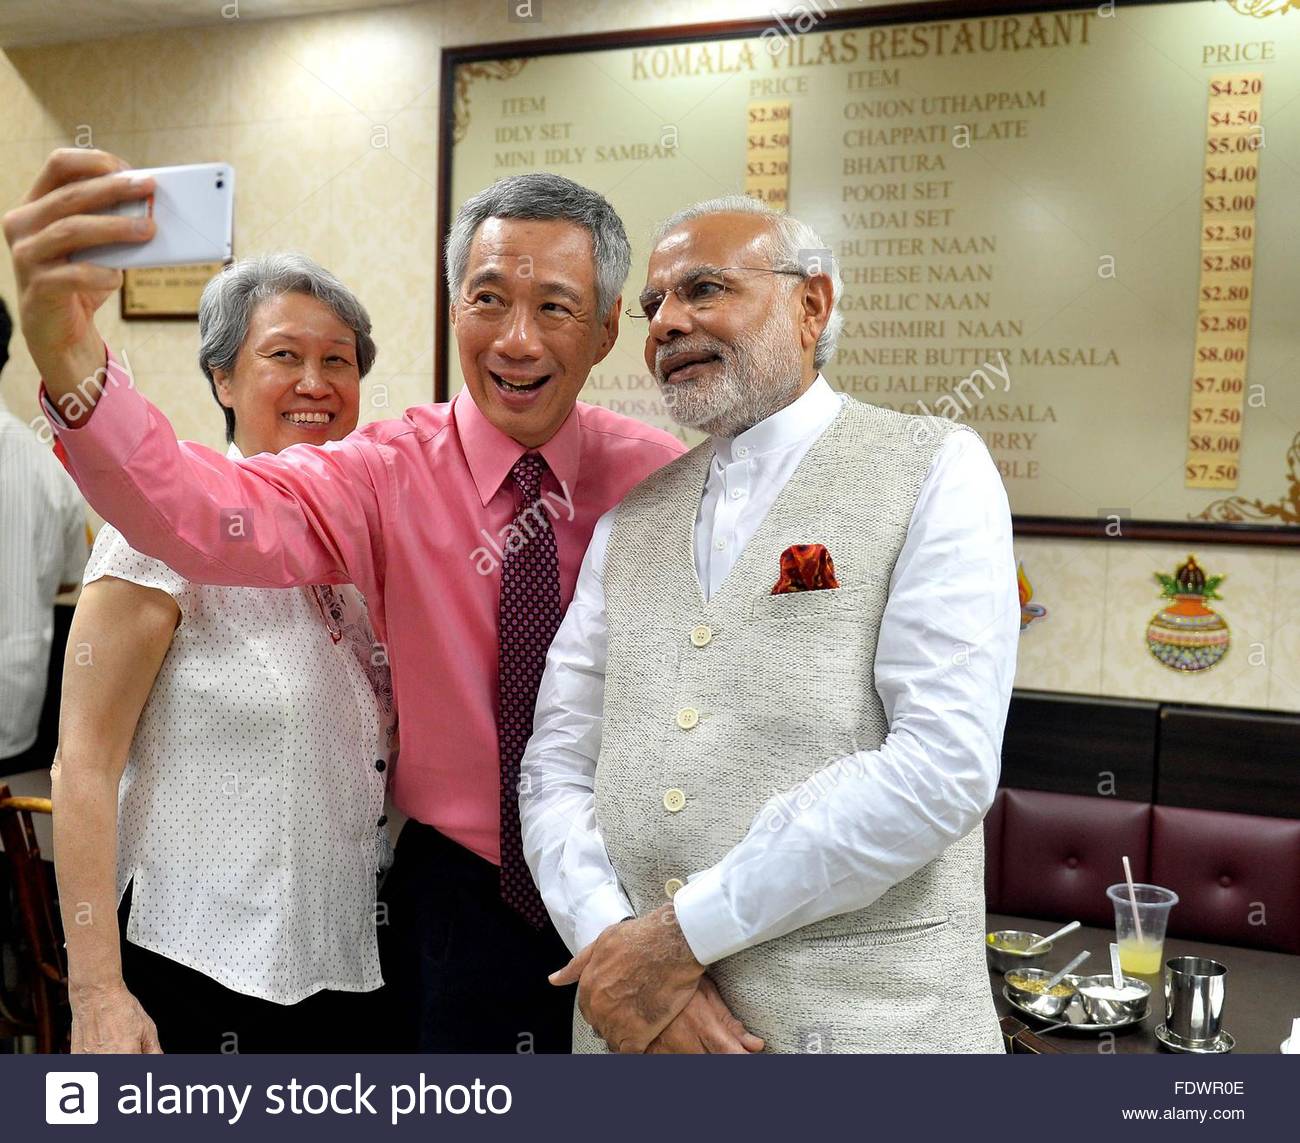 singapore-prime-minister-lee-hsien-loong-takes-a-selfie-with-indian-FDWR0E.jpg